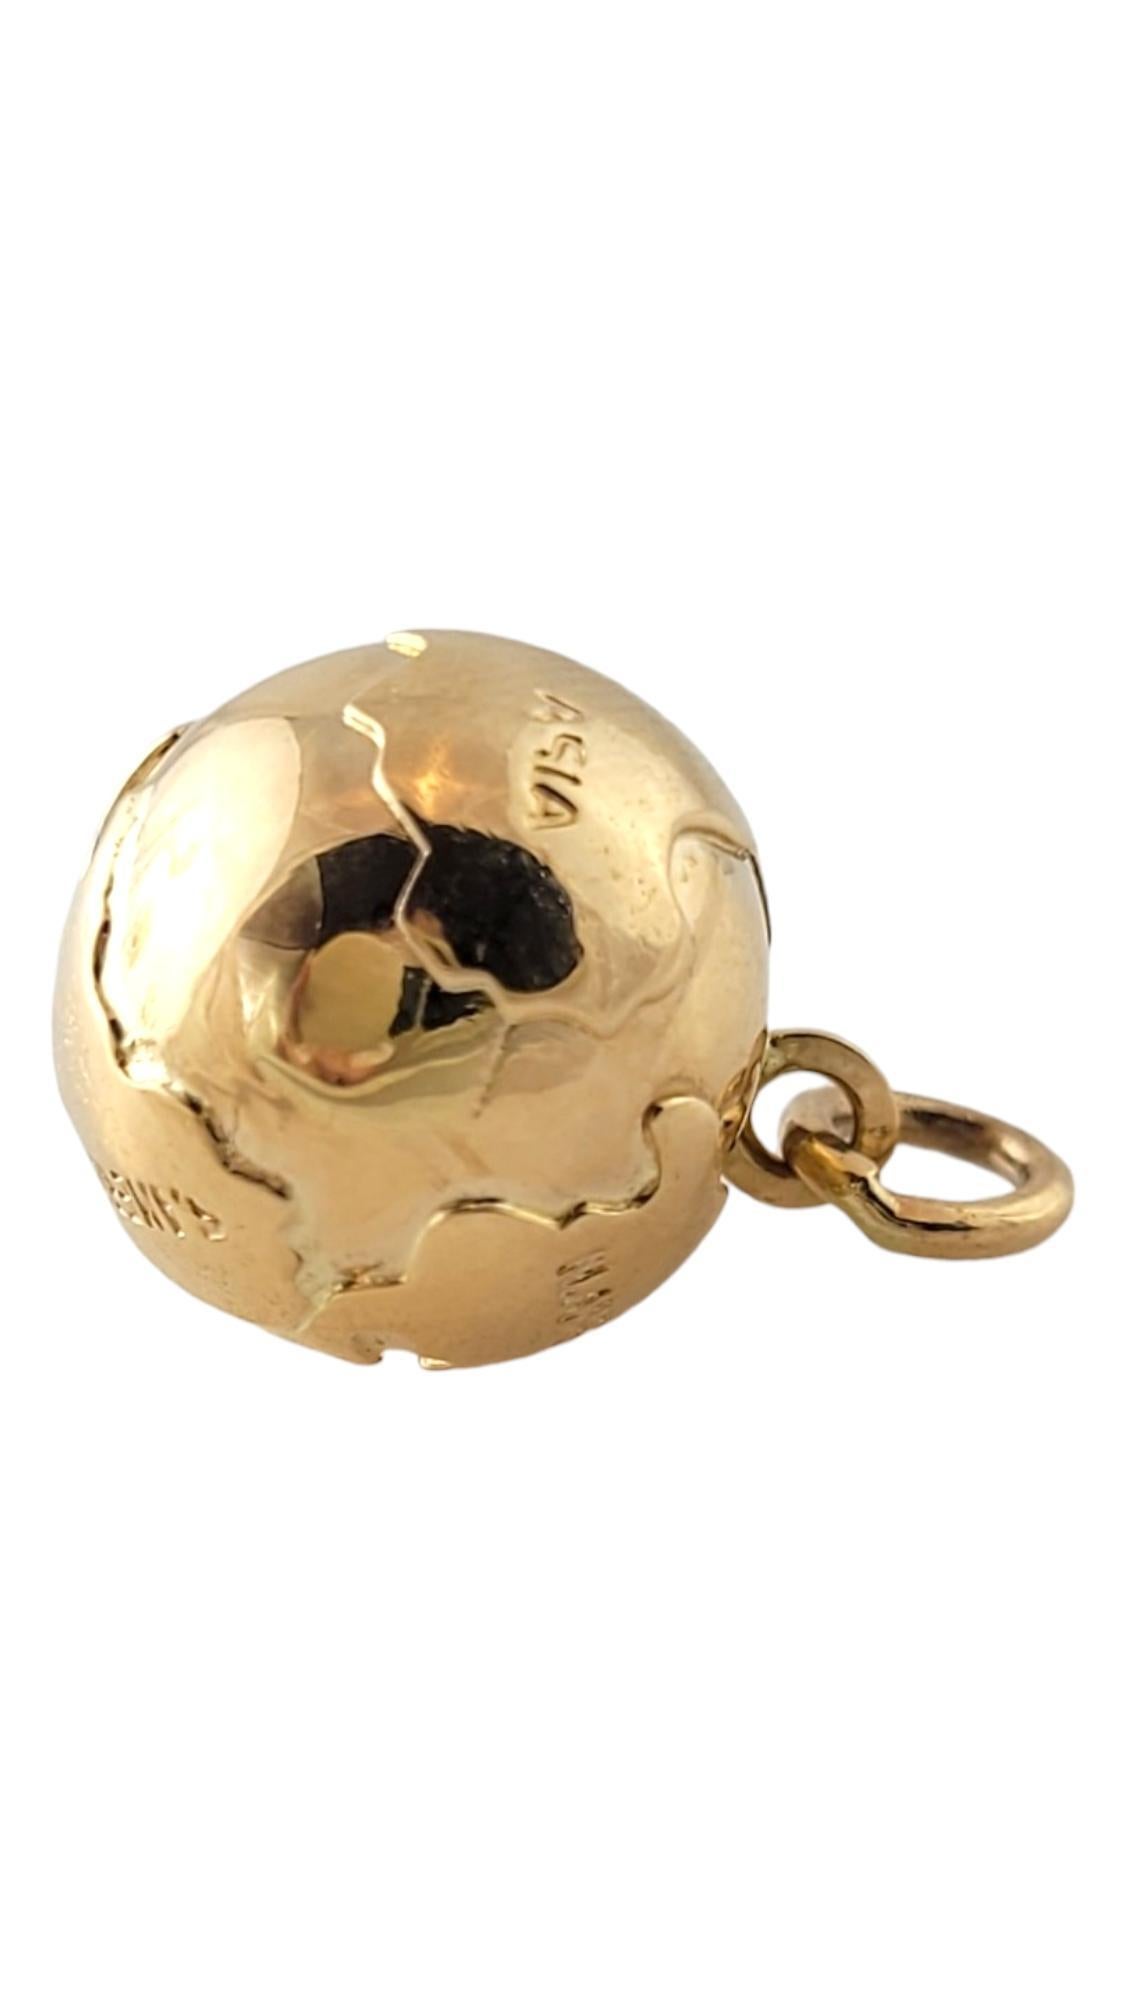 14K Yellow Gold Globe Charm

This adorable globe charm is meticulously crafted from 14K yellow gold!

Size: 18.6mm X 15.7mm X 15.7mm

Weight: 3.4 dwt/ 5.2 g

Tested 14K

Very good condition, professionally polished.

Will come packaged in a gift box